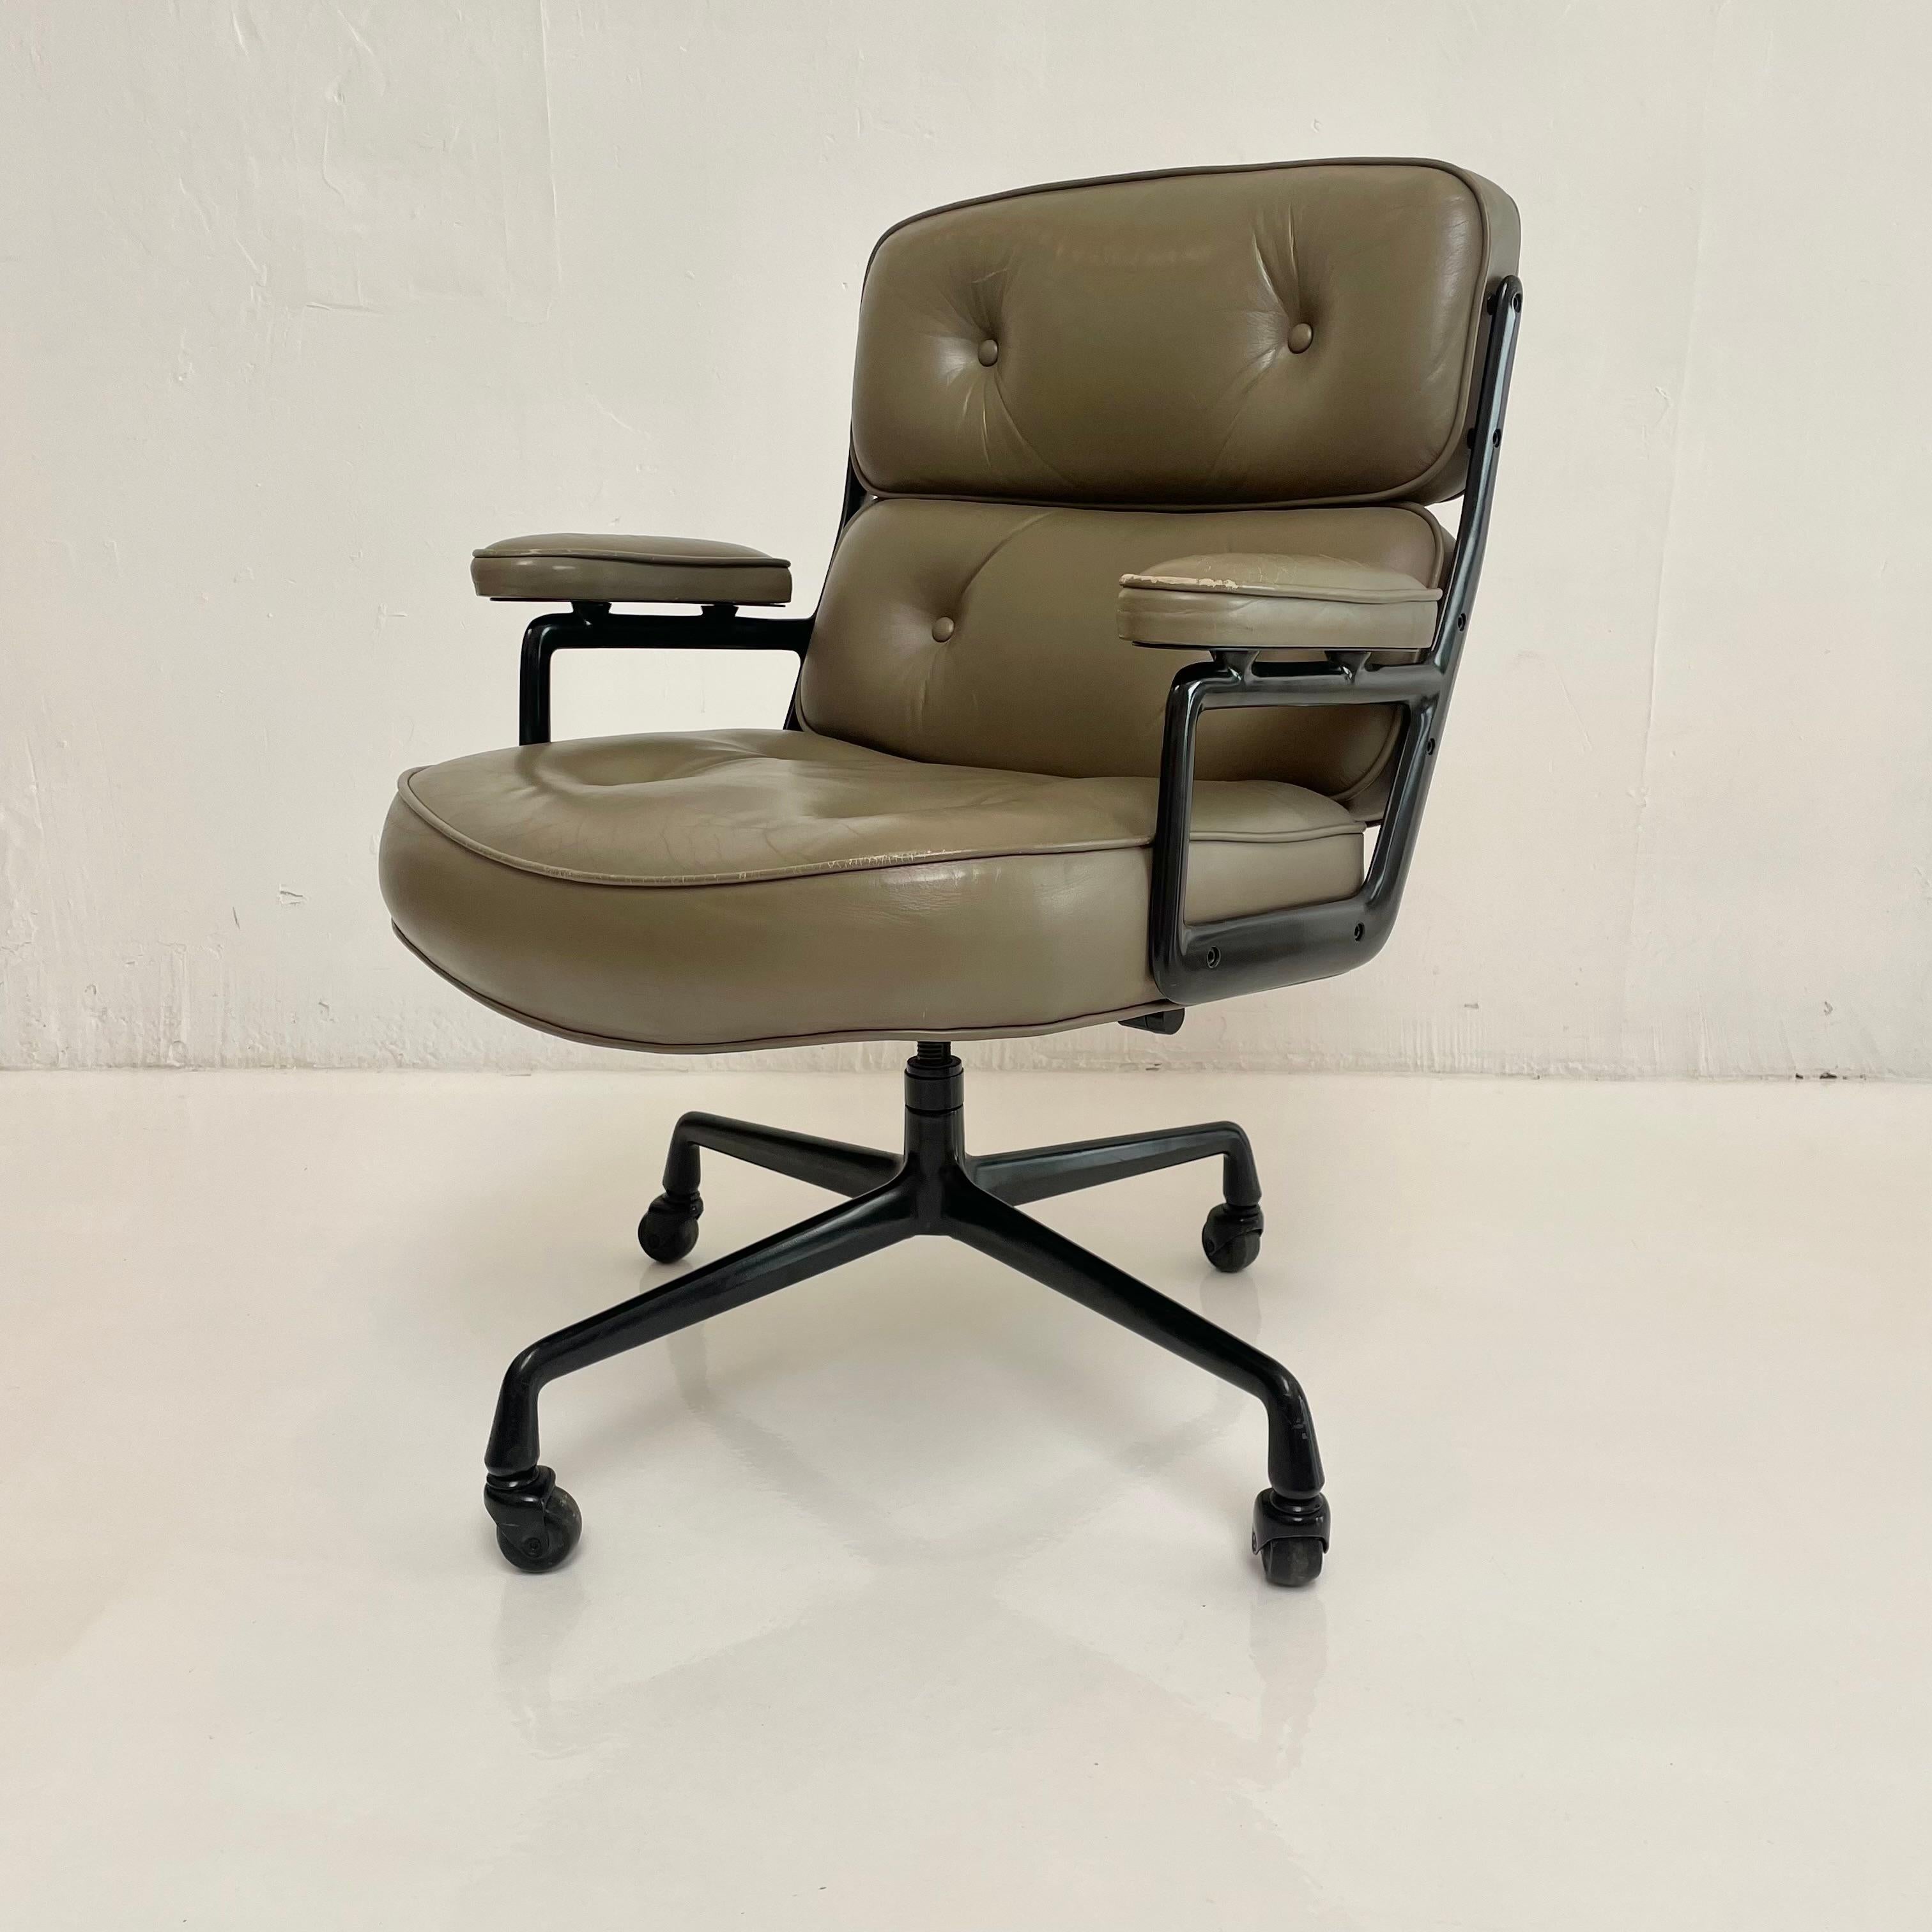 Eames Time Life Chair in Olive Leather for Herman Miller, c. 1984 USA 2